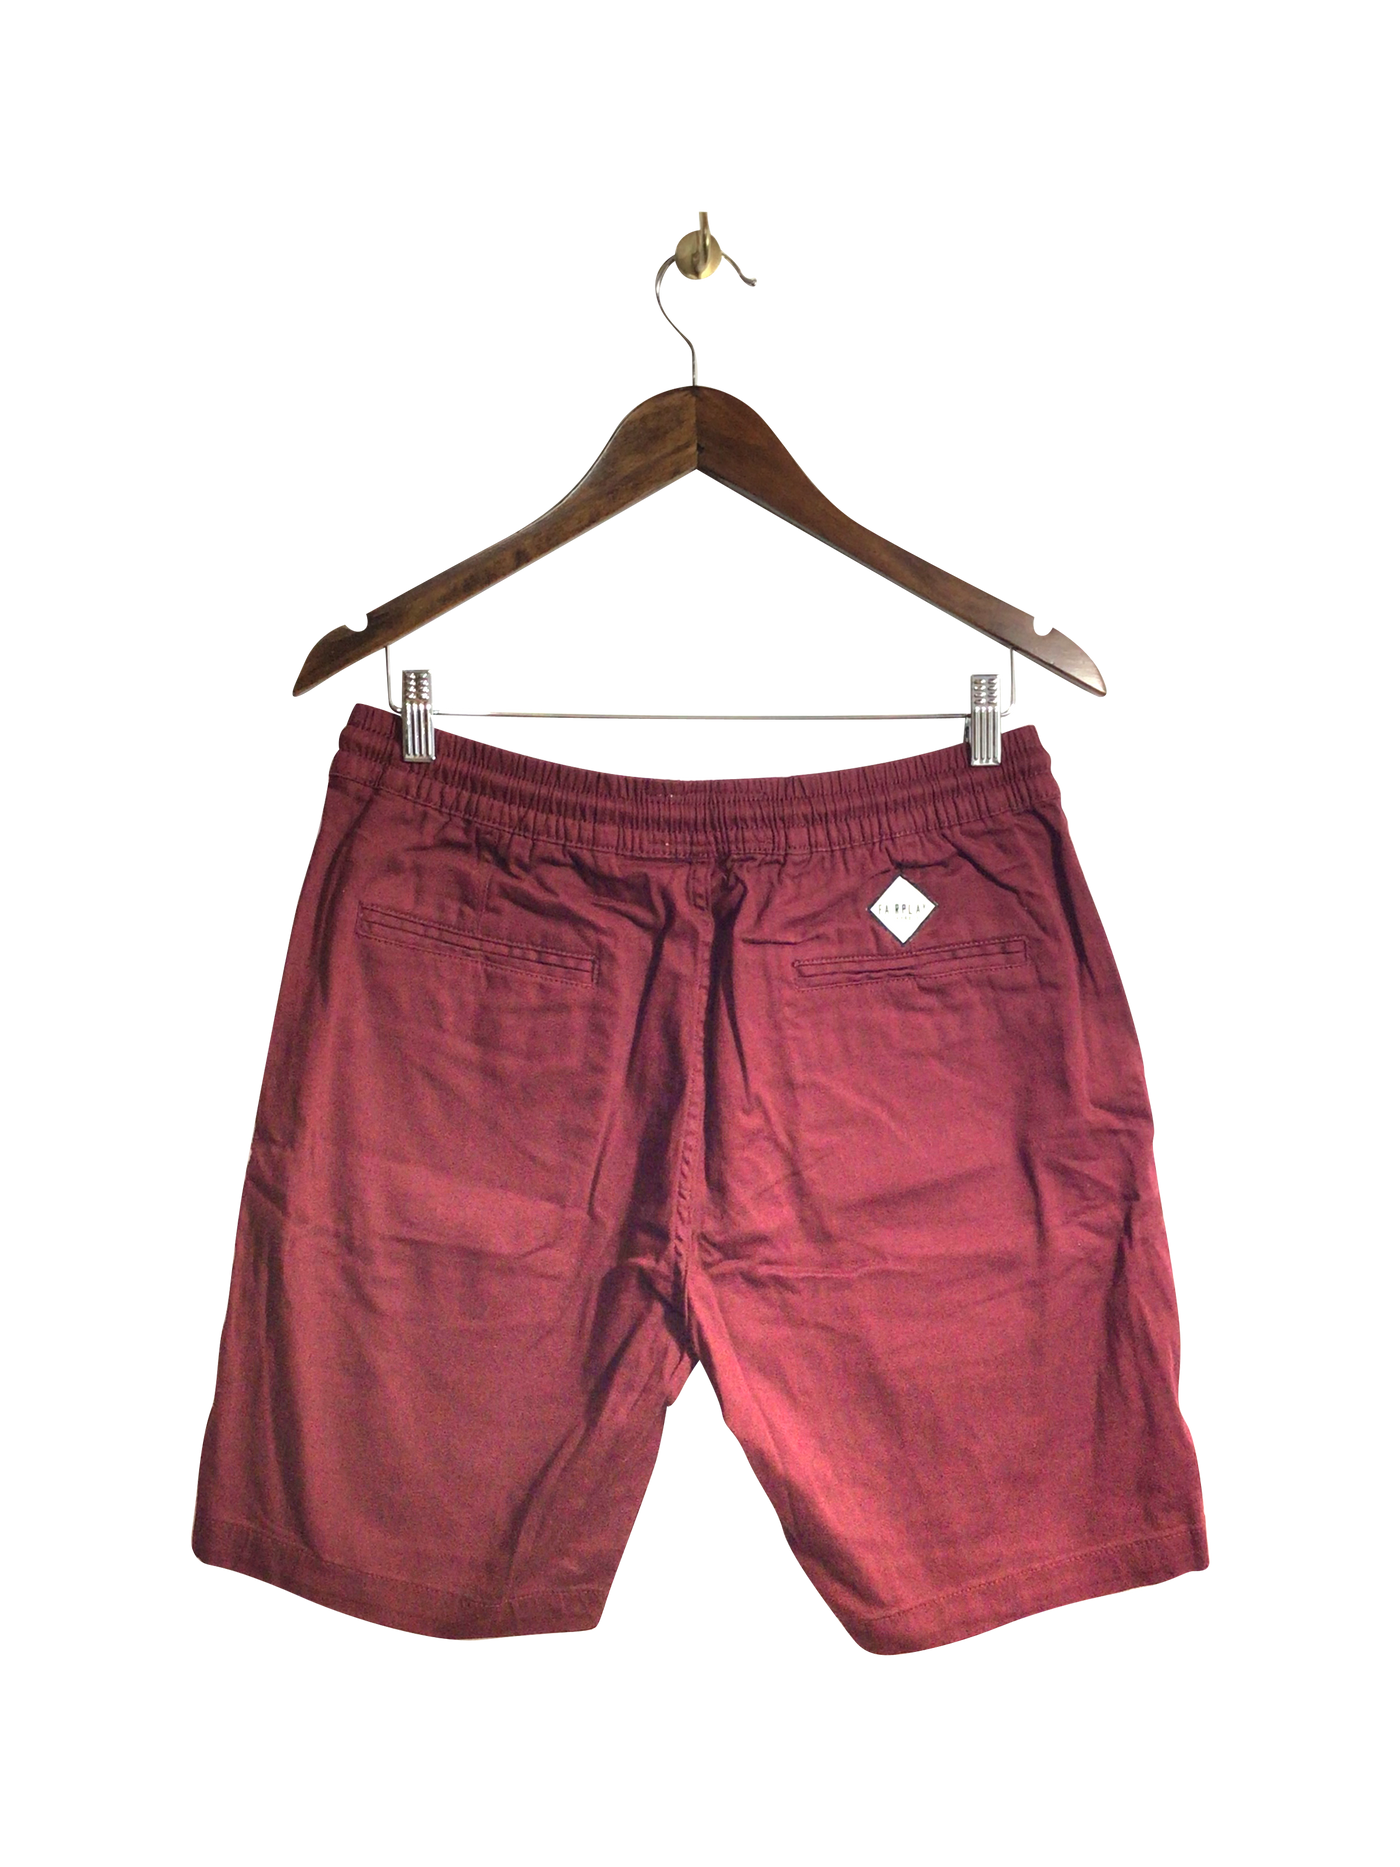 FAIRPLAY Women Classic Shorts Regular fit in Red - Size 32 | 15 $ KOOP